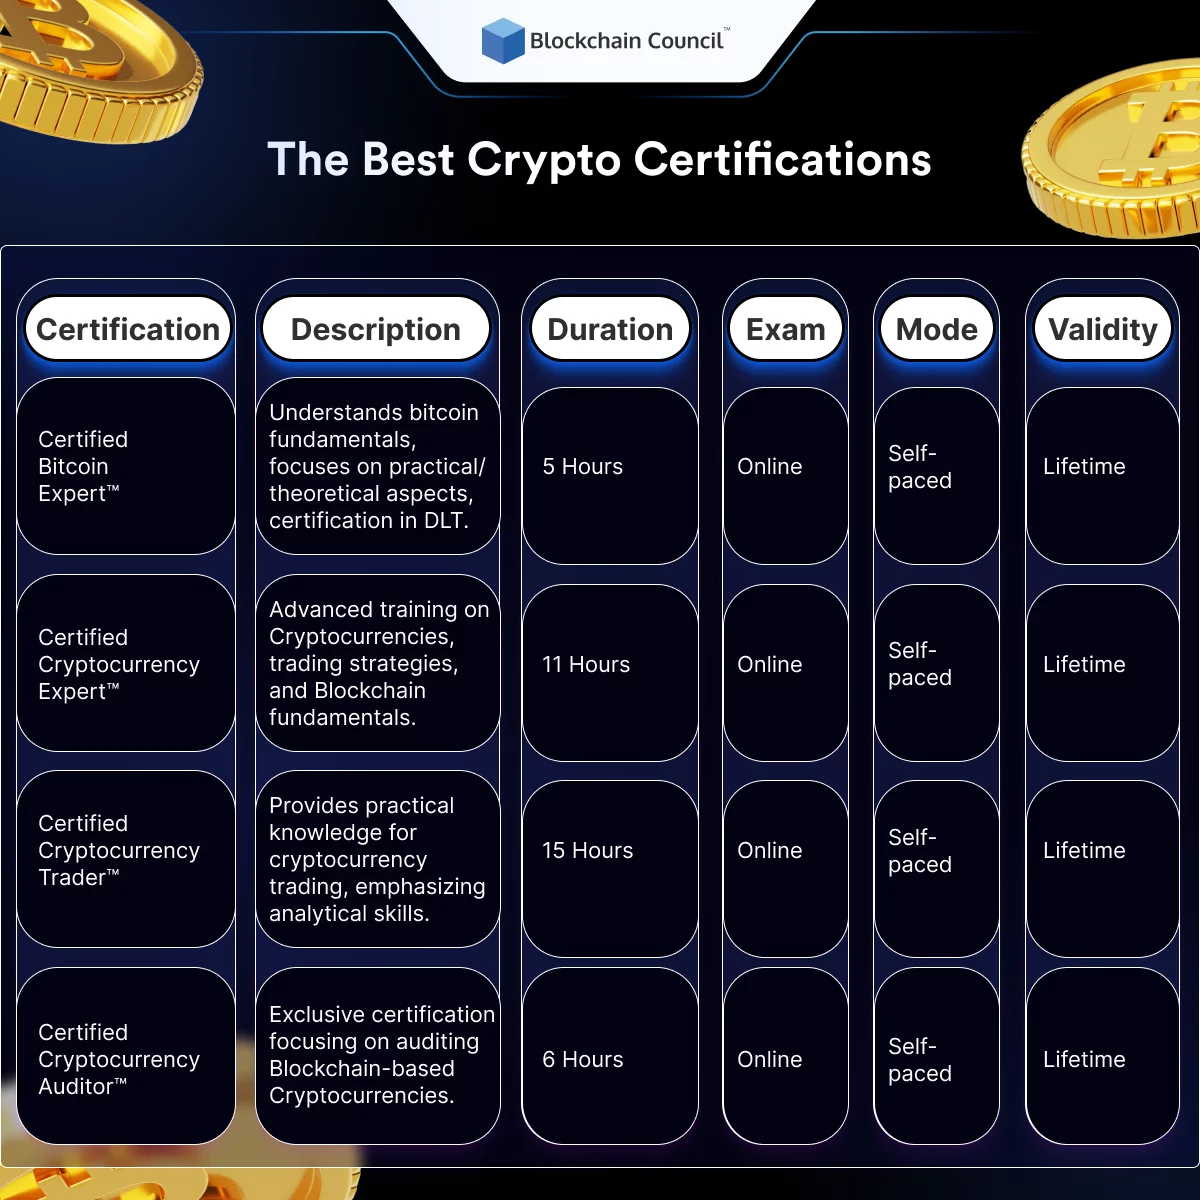 The Best Crypto Certifications